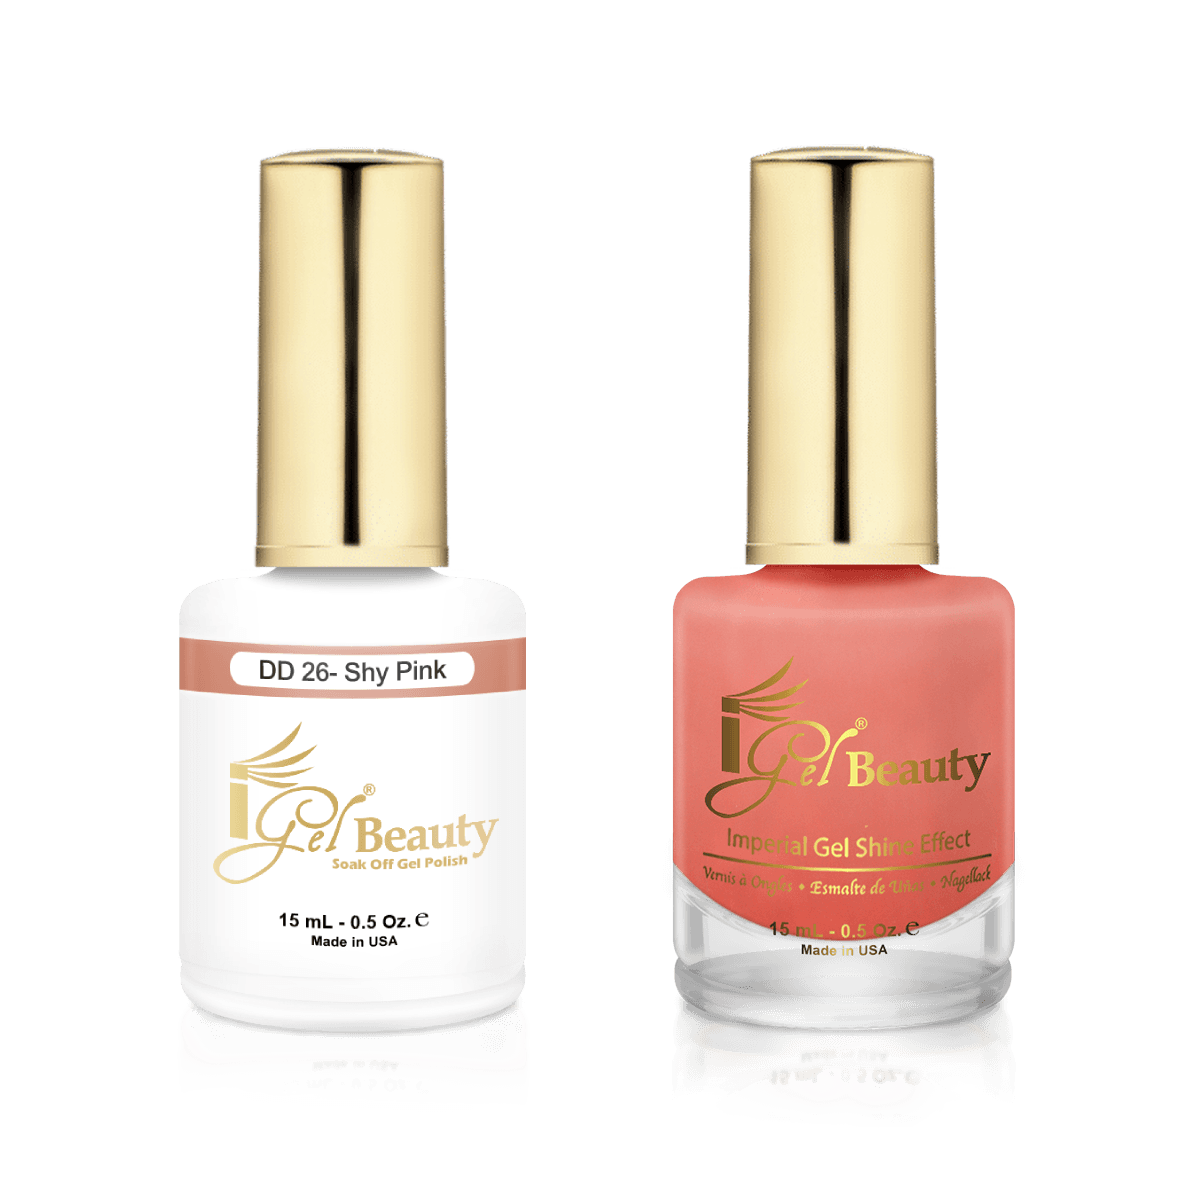 IGel Duo Gel Polish + Matching Nail Lacquer DD 26 SKY PINK